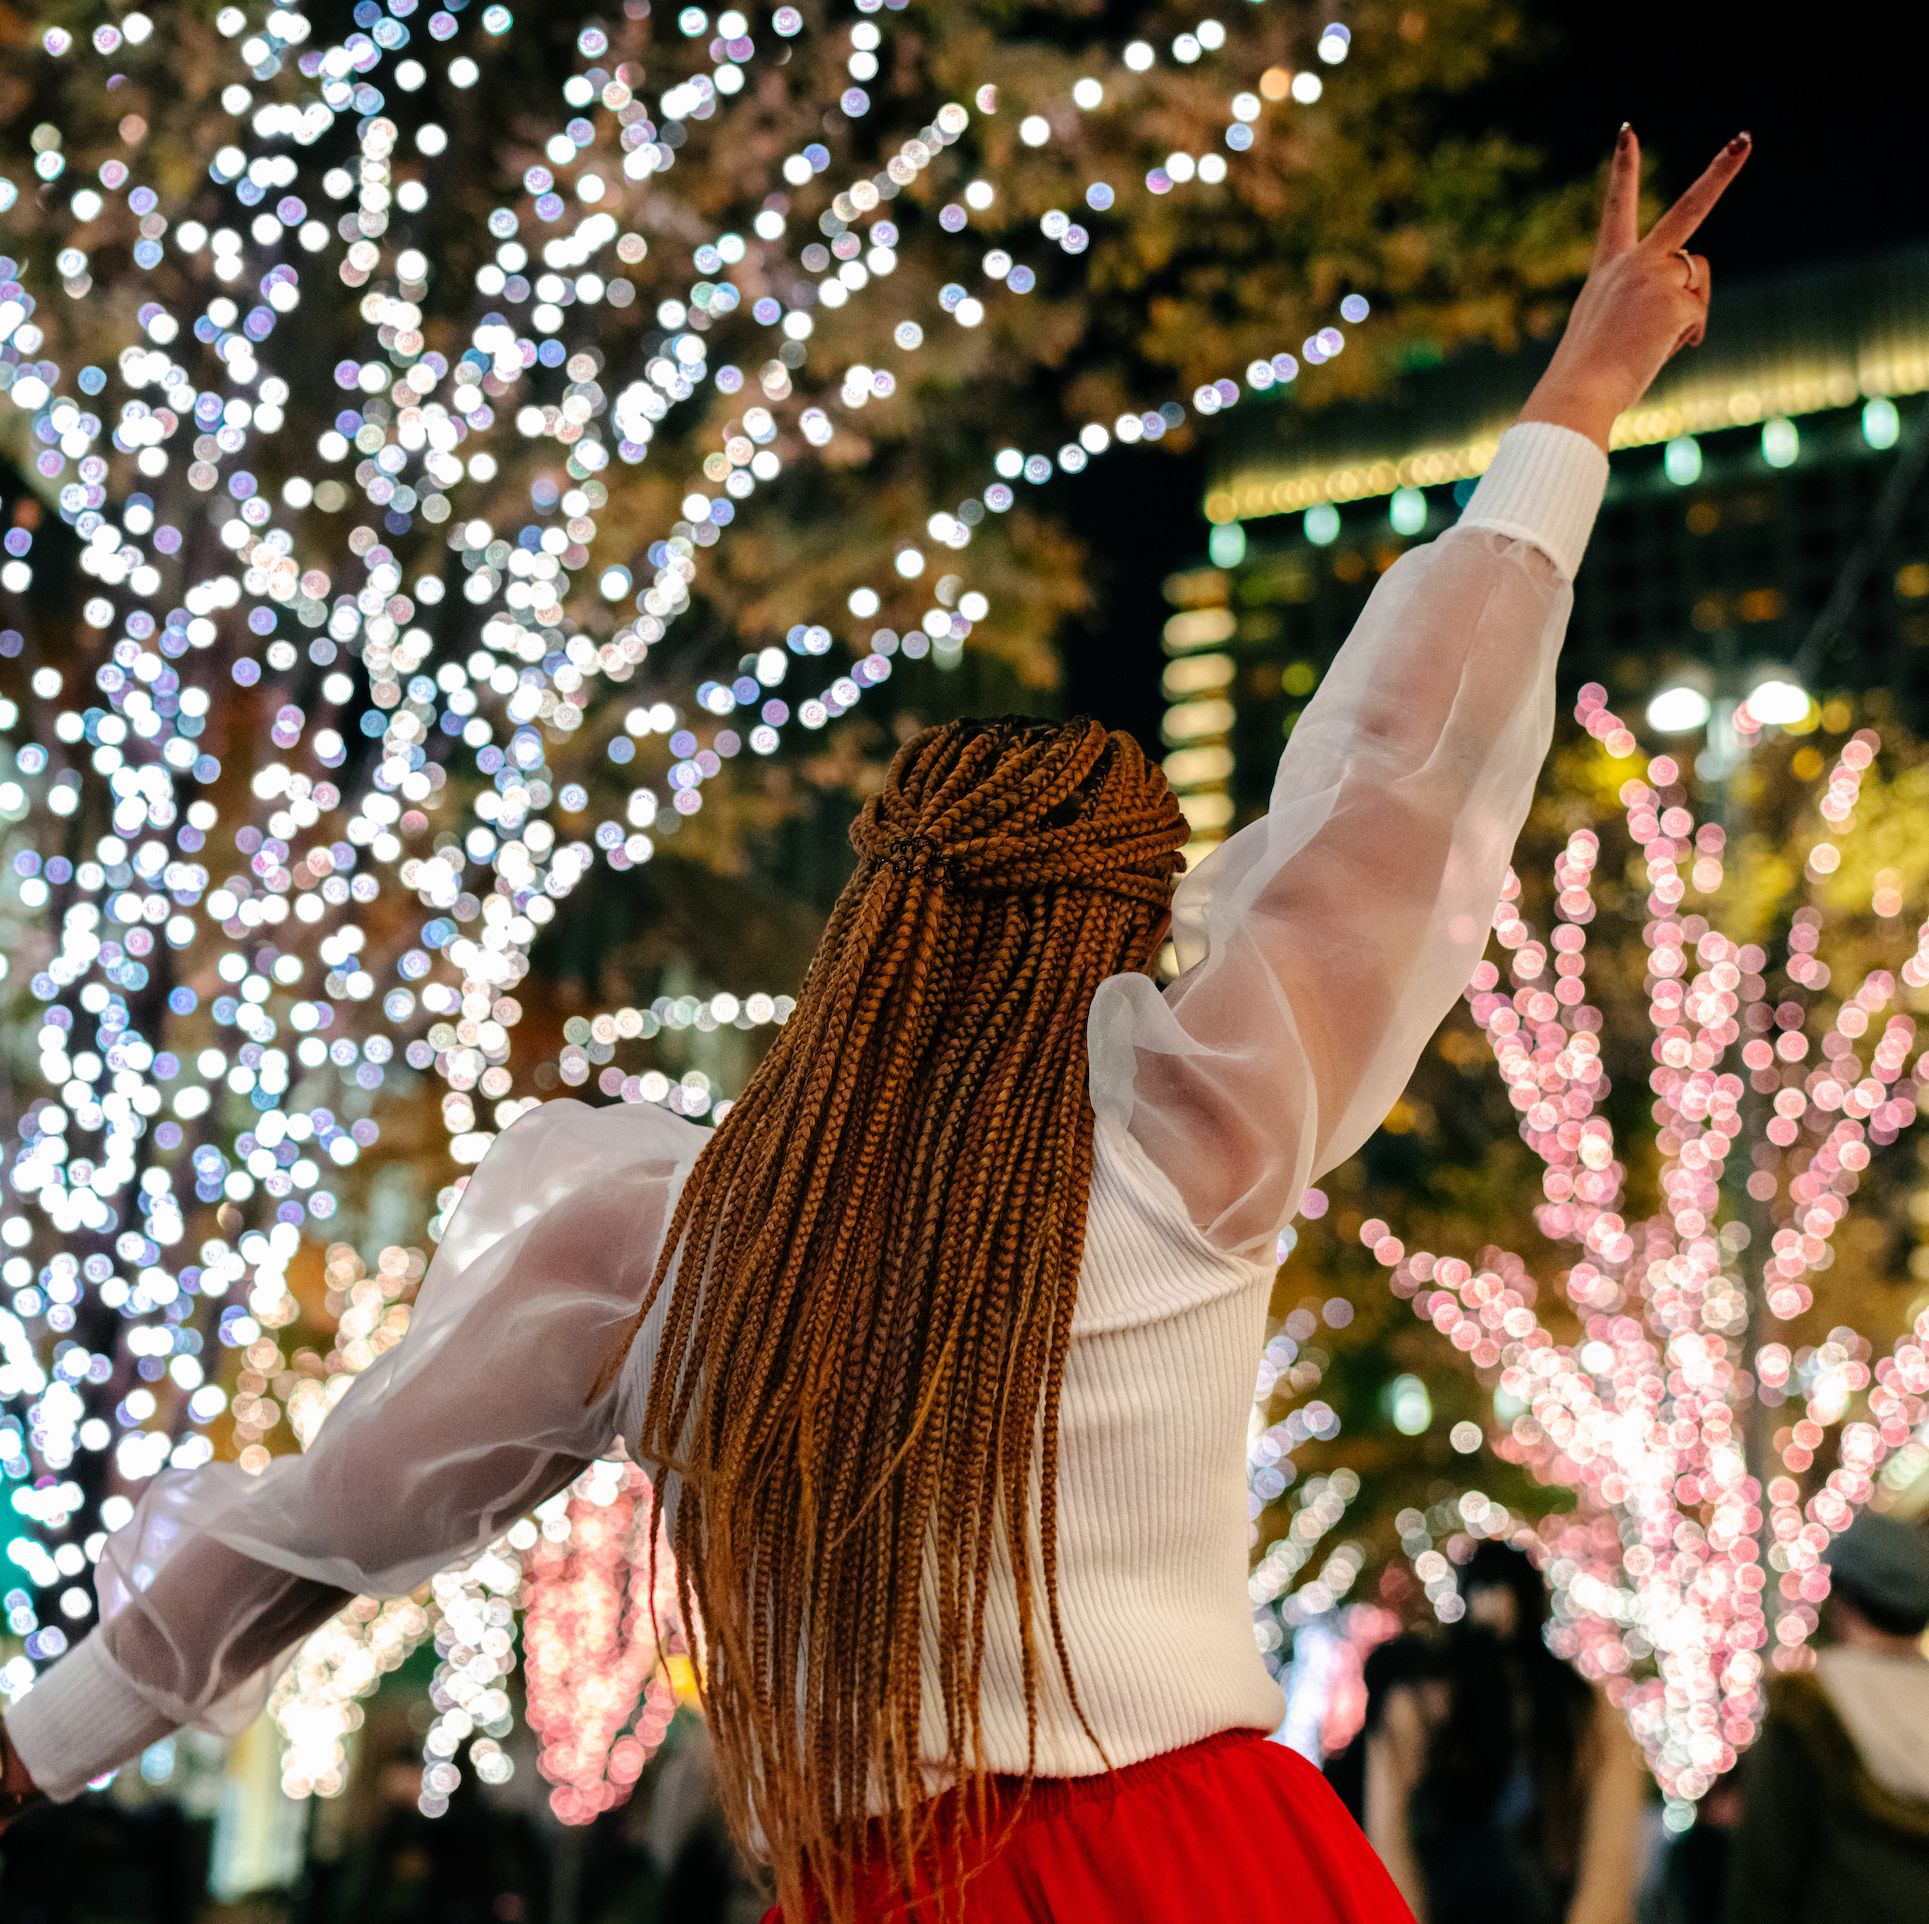 Alone For Christmas? Here's 13 Surprisingly Fun Things To Do